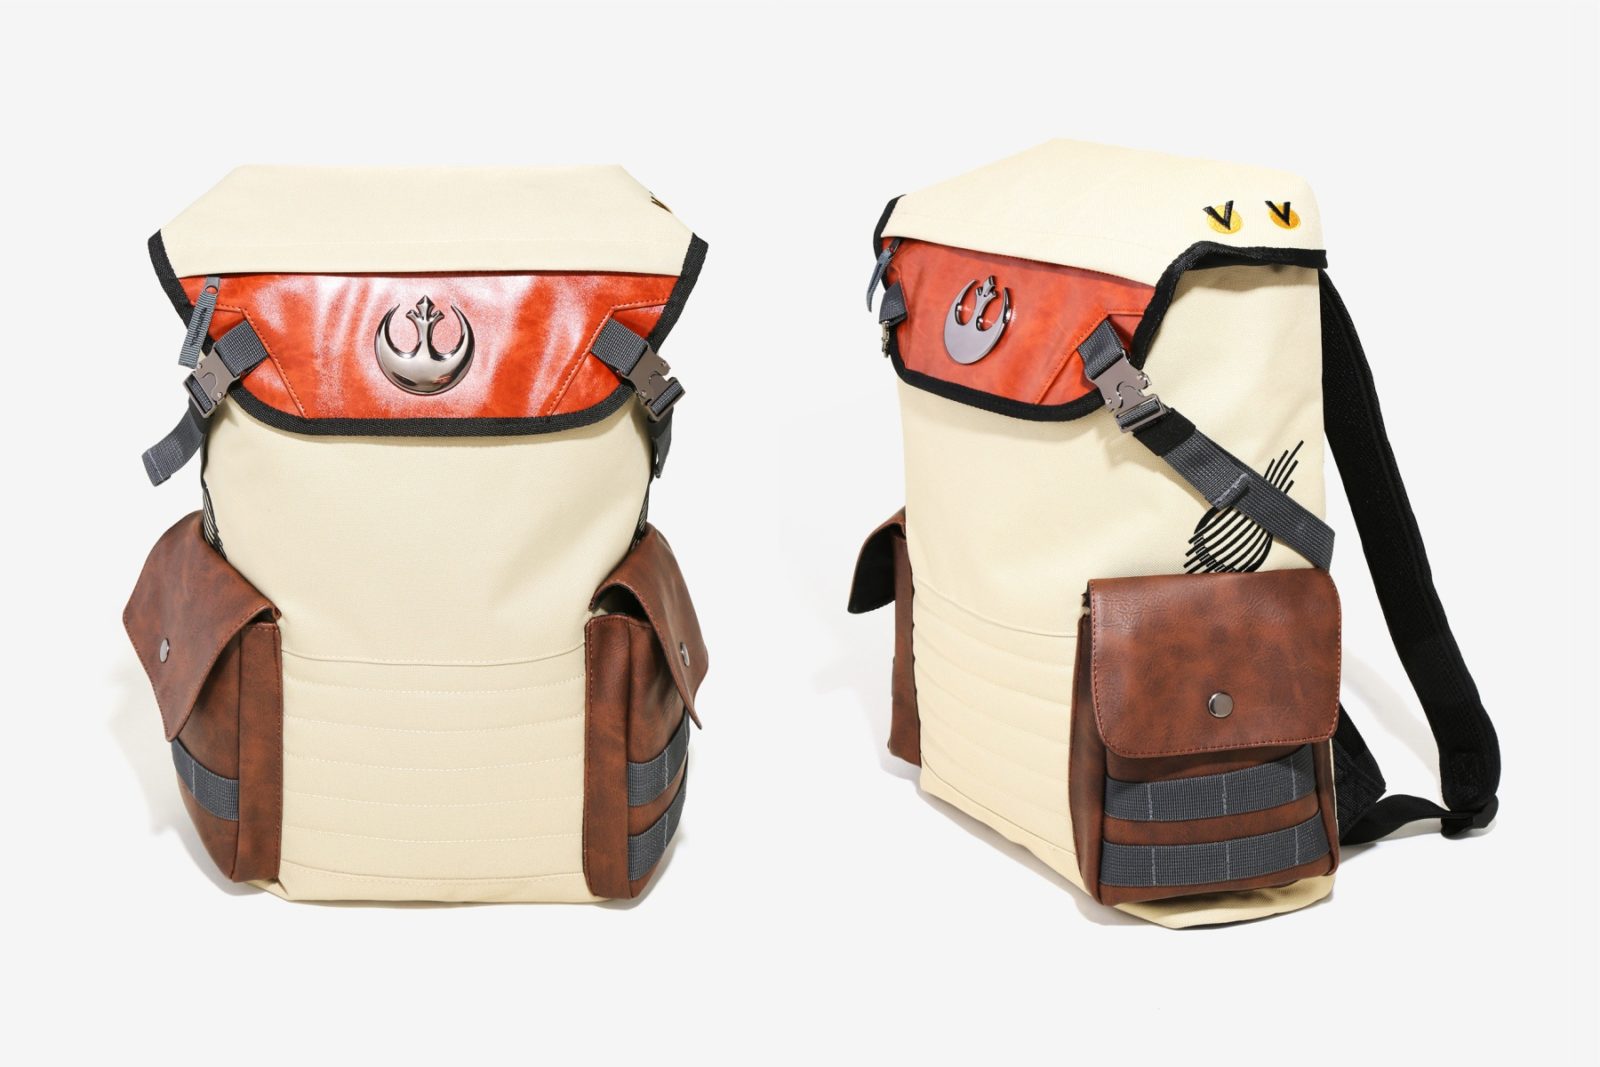 Star Wars Rebel backpack at Box Lunch